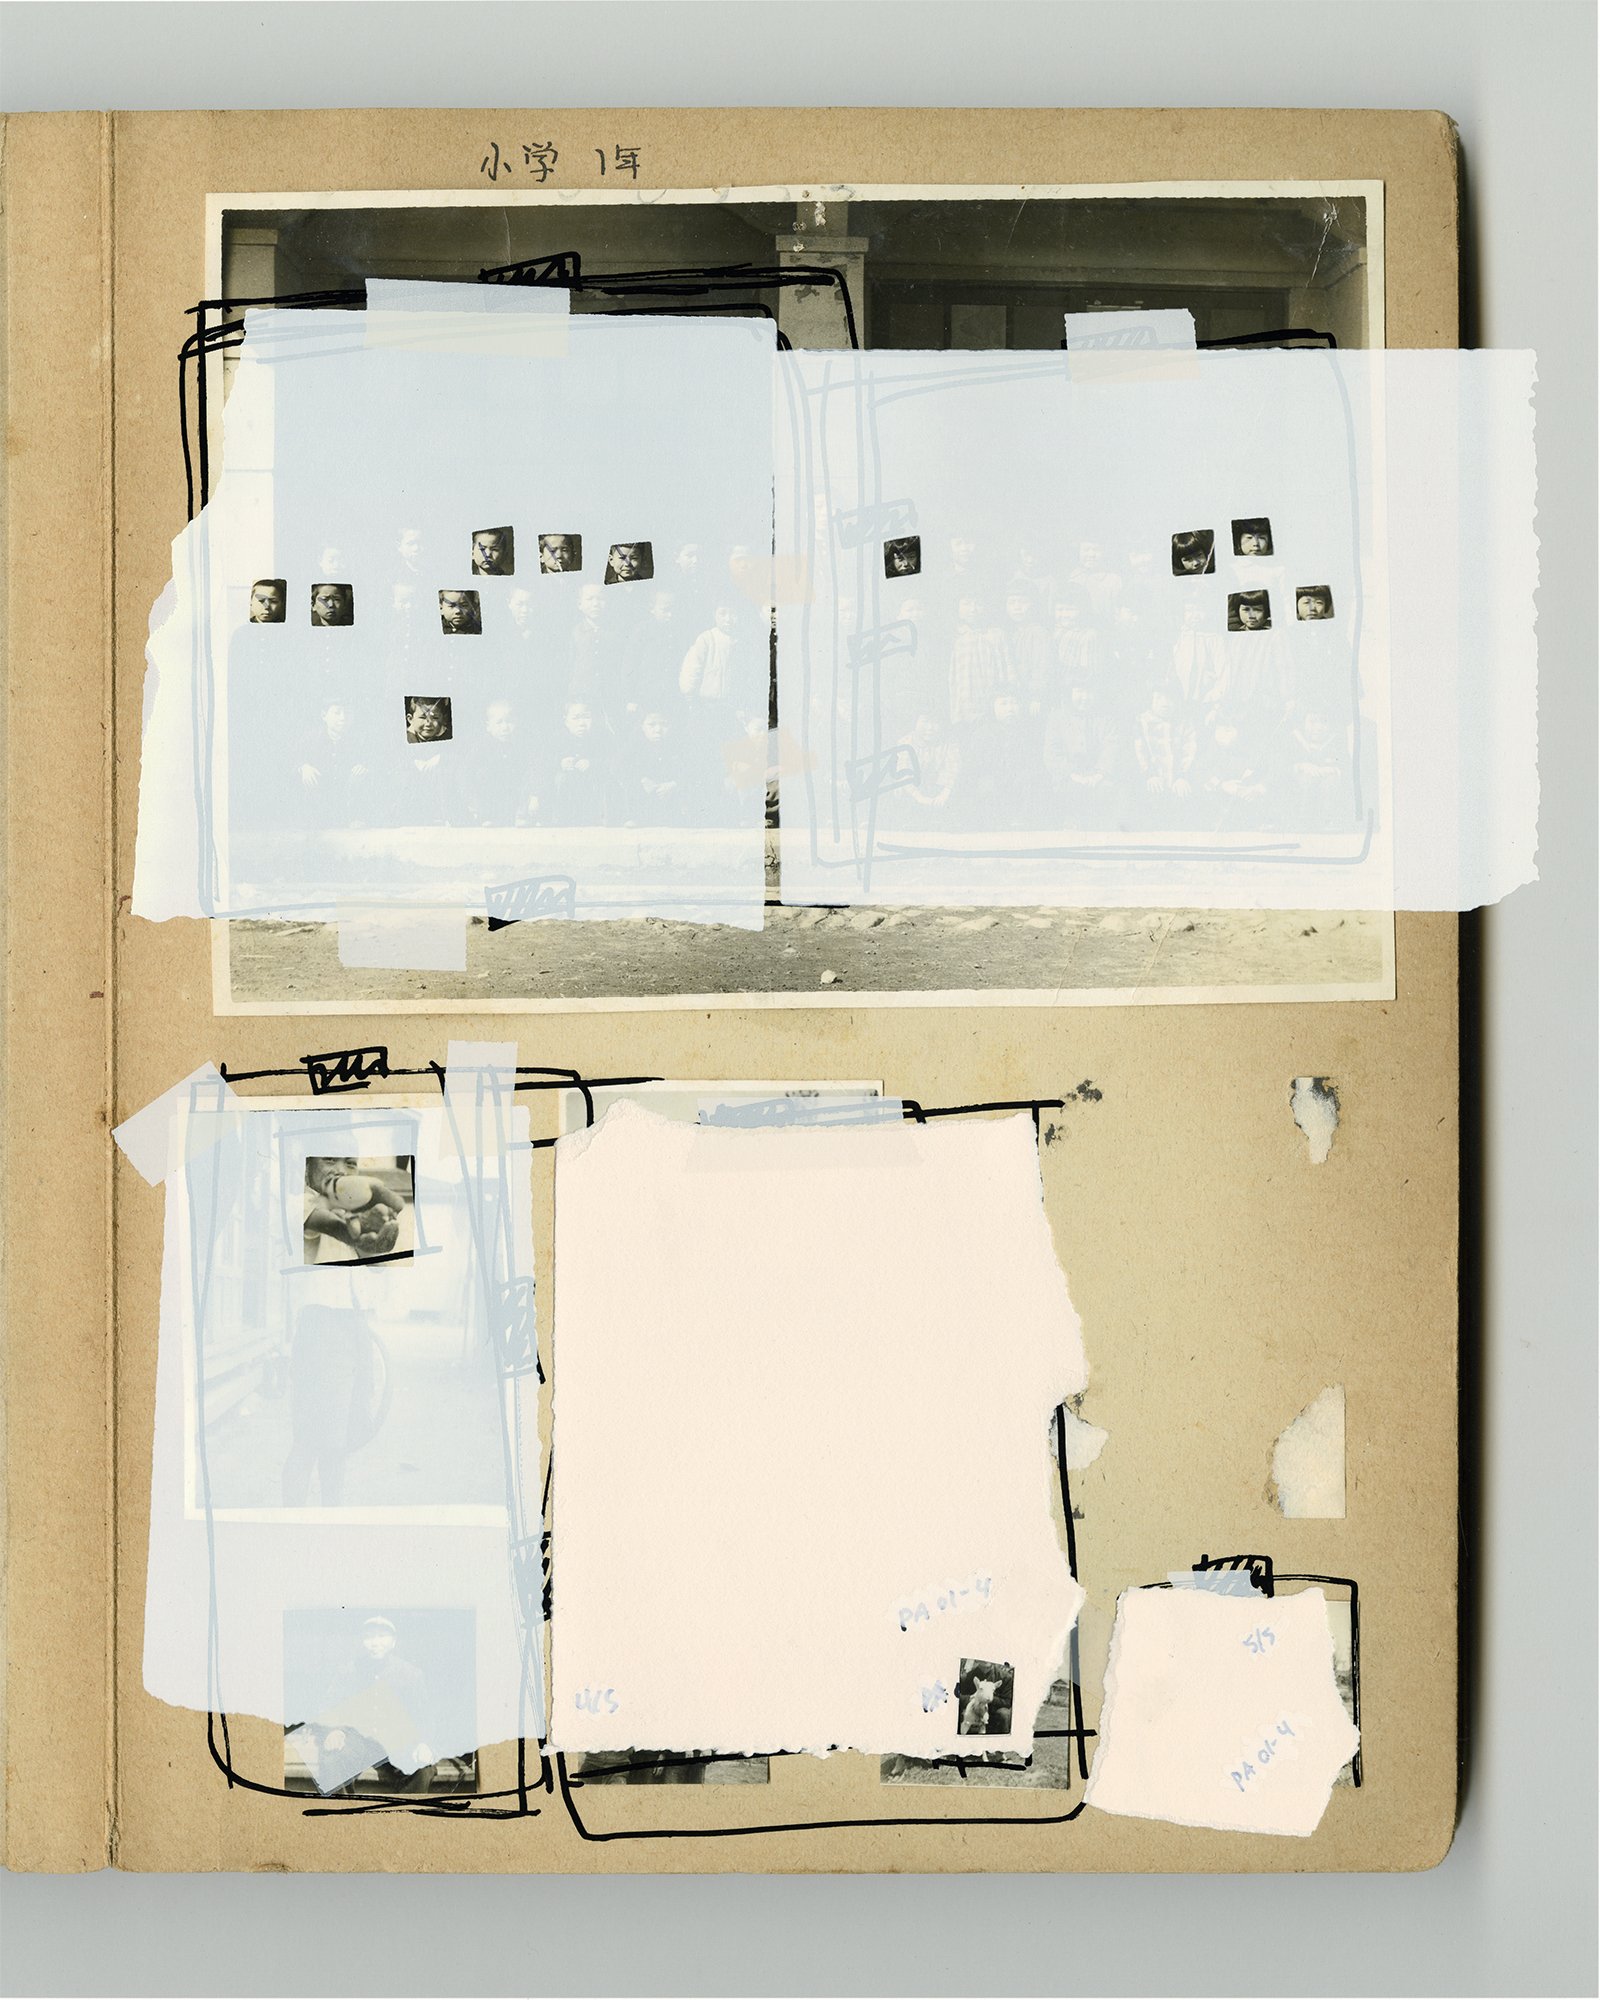   Photo Album 01-06 , 2019, silkscreen and collage on pigment print, 20x16 inches. 